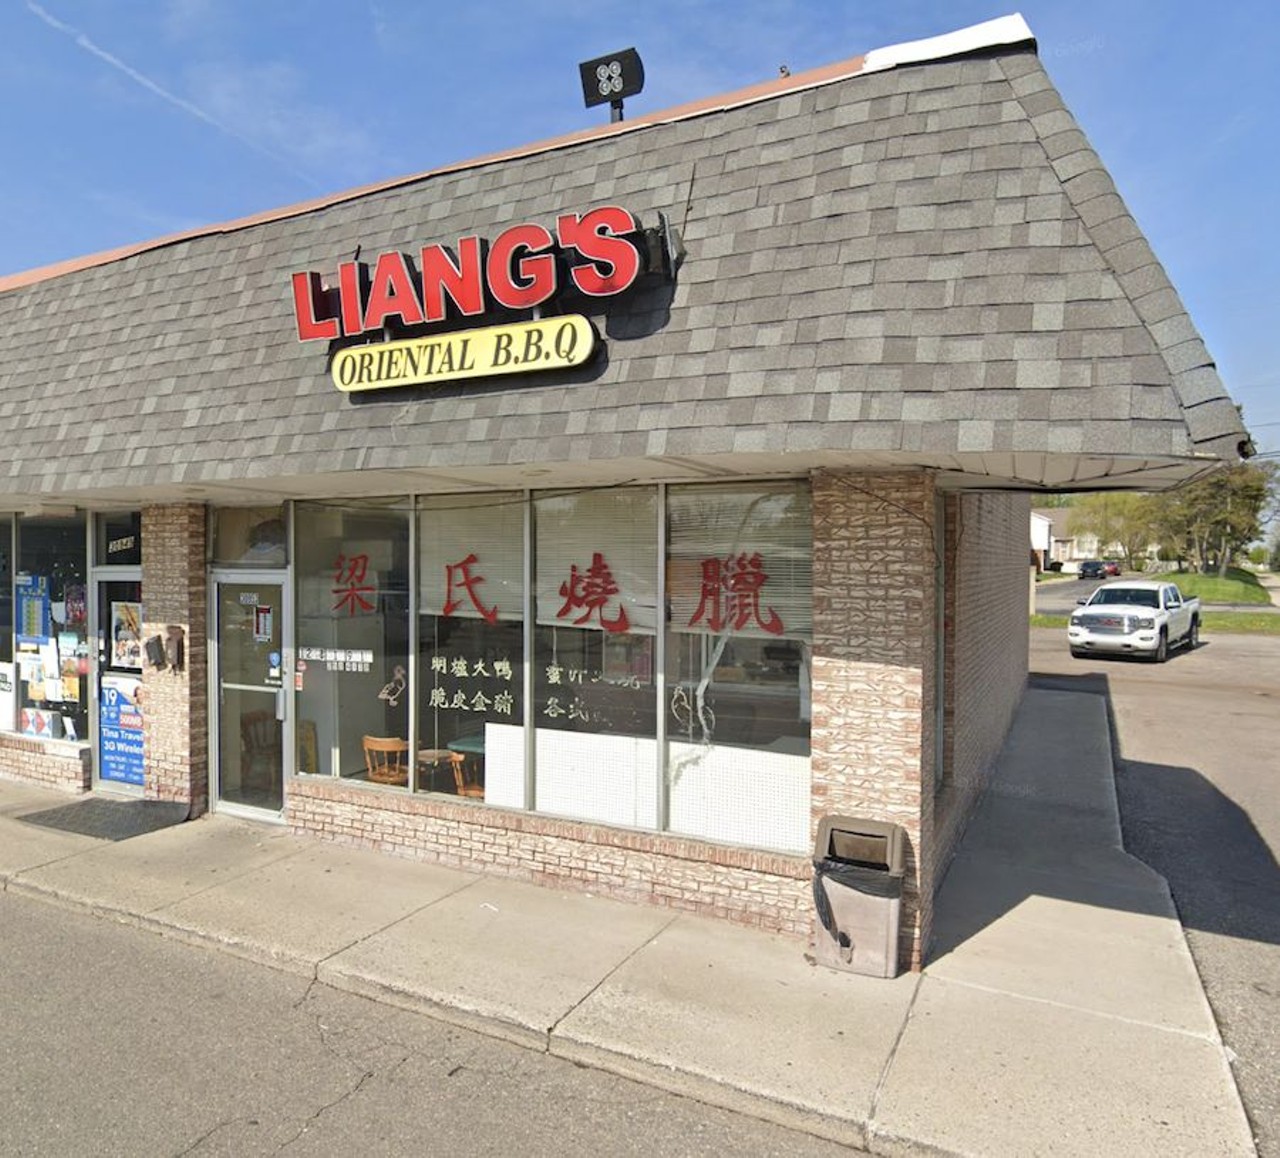 Liang&#146;s Barbecue
30953 Dequindre Rd., Madison Heights; 248-616-9616; liangs-oriental.edan.io
Located in one of Madison Heights' many strip malls that contain a variety of Asian eateries, the tradition of &#147;whole beast cookery&#148; is on display in the glossy whole hogs, ducks, and chickens hanging from hooks above the counter, and the chewy beef belly, intestines, and other offal simmering in gravy steam pans. Liang&#146;s offers a refreshing impression of authenticity with its versatile array of Chinese dishes.
Photo via GoogleMaps